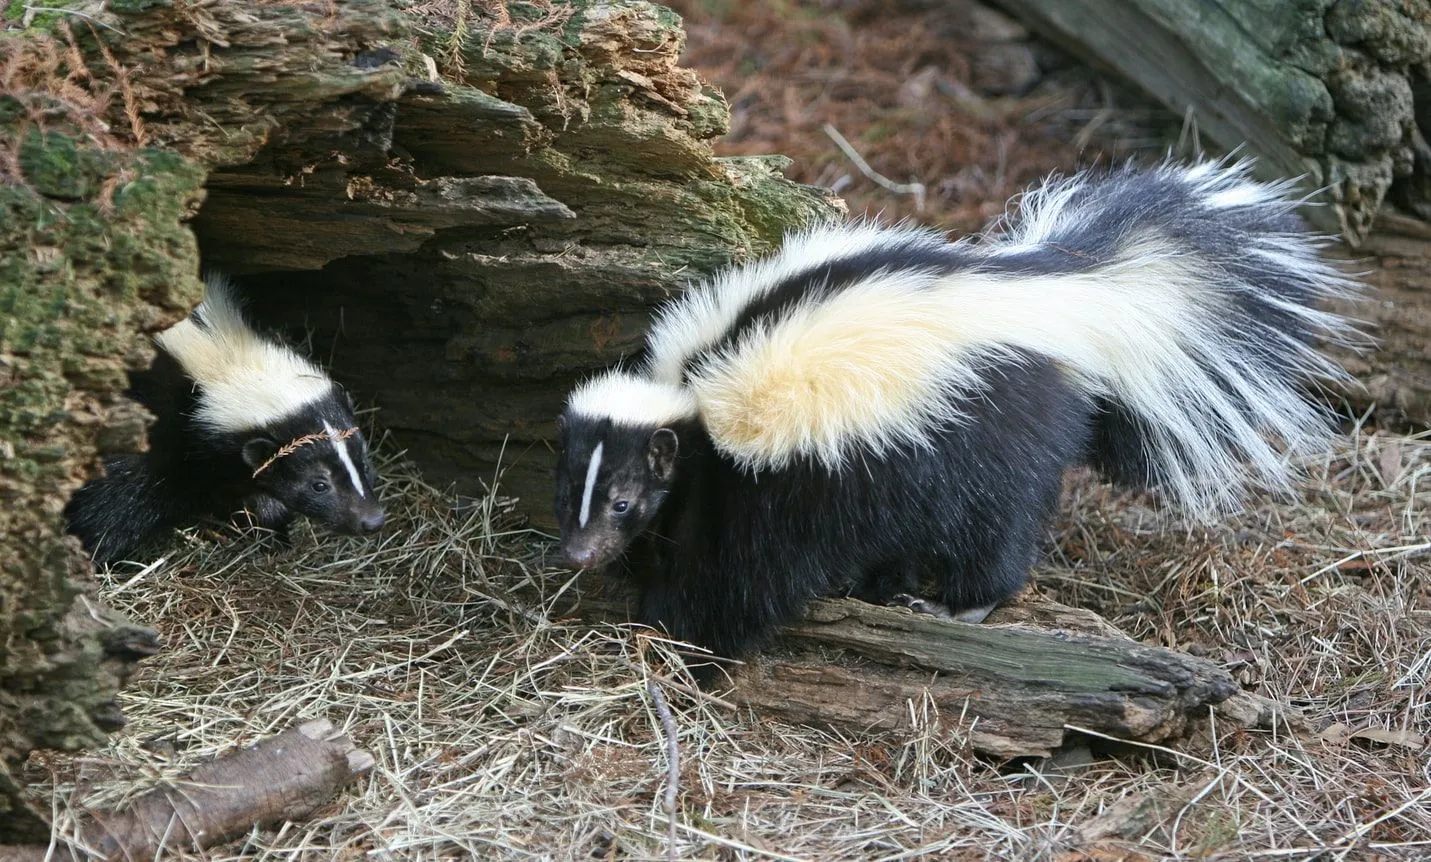 Striped Skunk facts are interesting for kids to know.